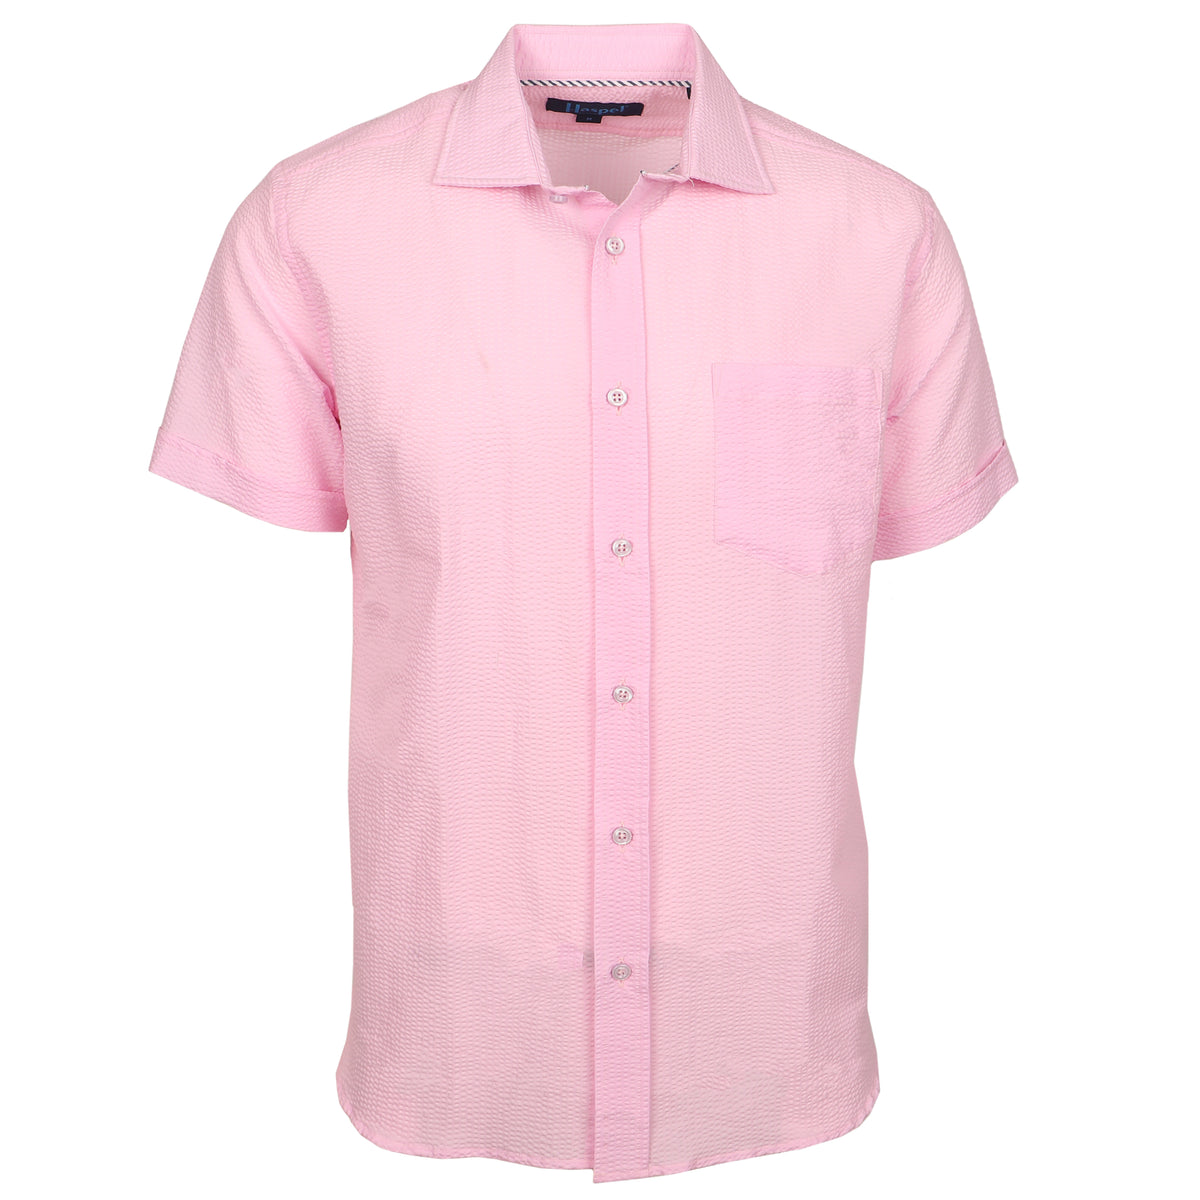 A solid look for a solid guy. The most beautiful light pink short sleeve shirt soon to be on your statuesque frame. Seersucker, lightweight, and supremely cool.